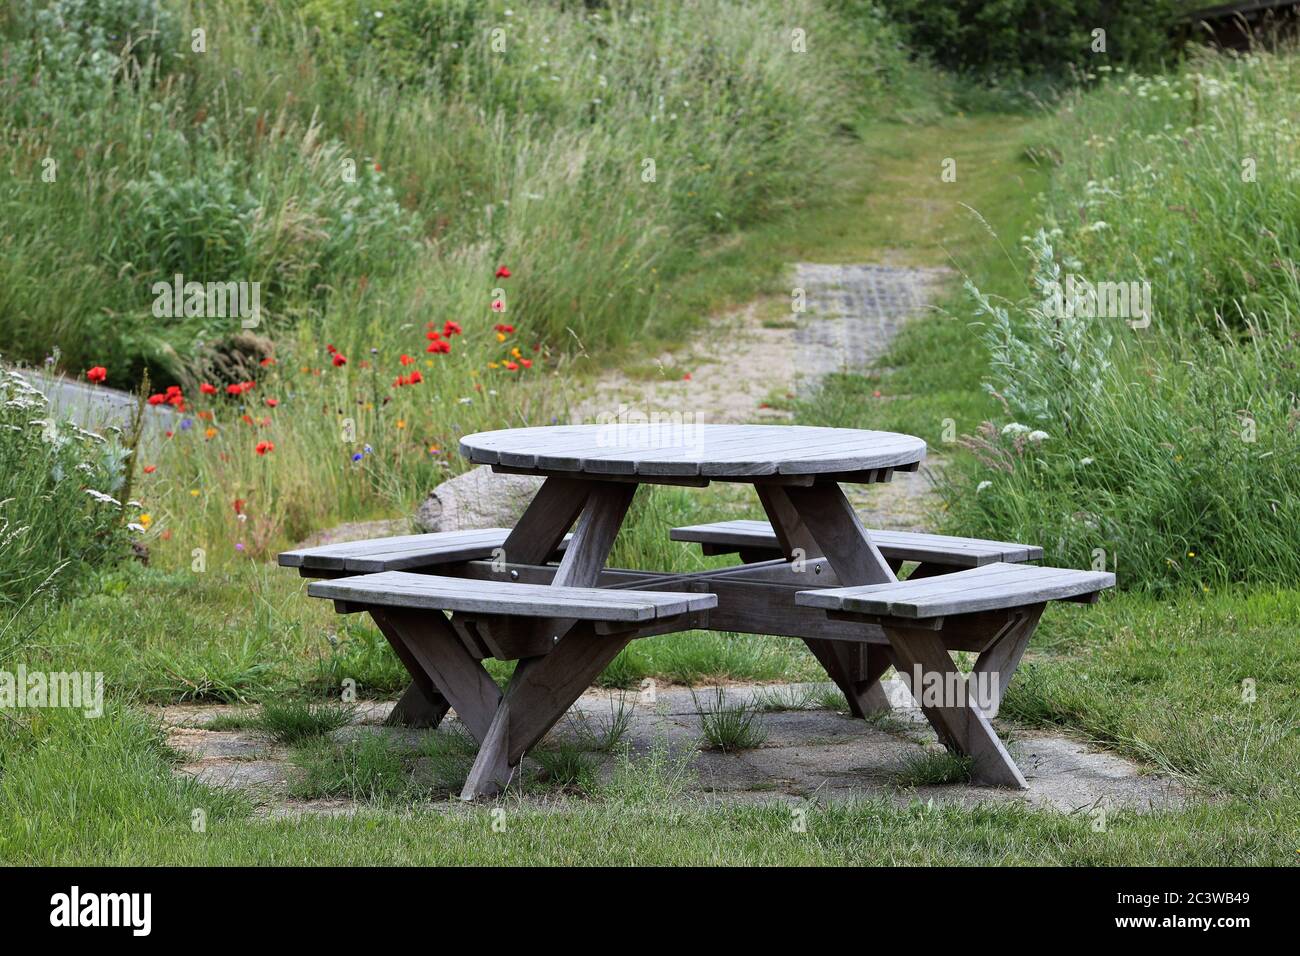 Round Table With Benches And Grass In The Background Stock Photo Alamy